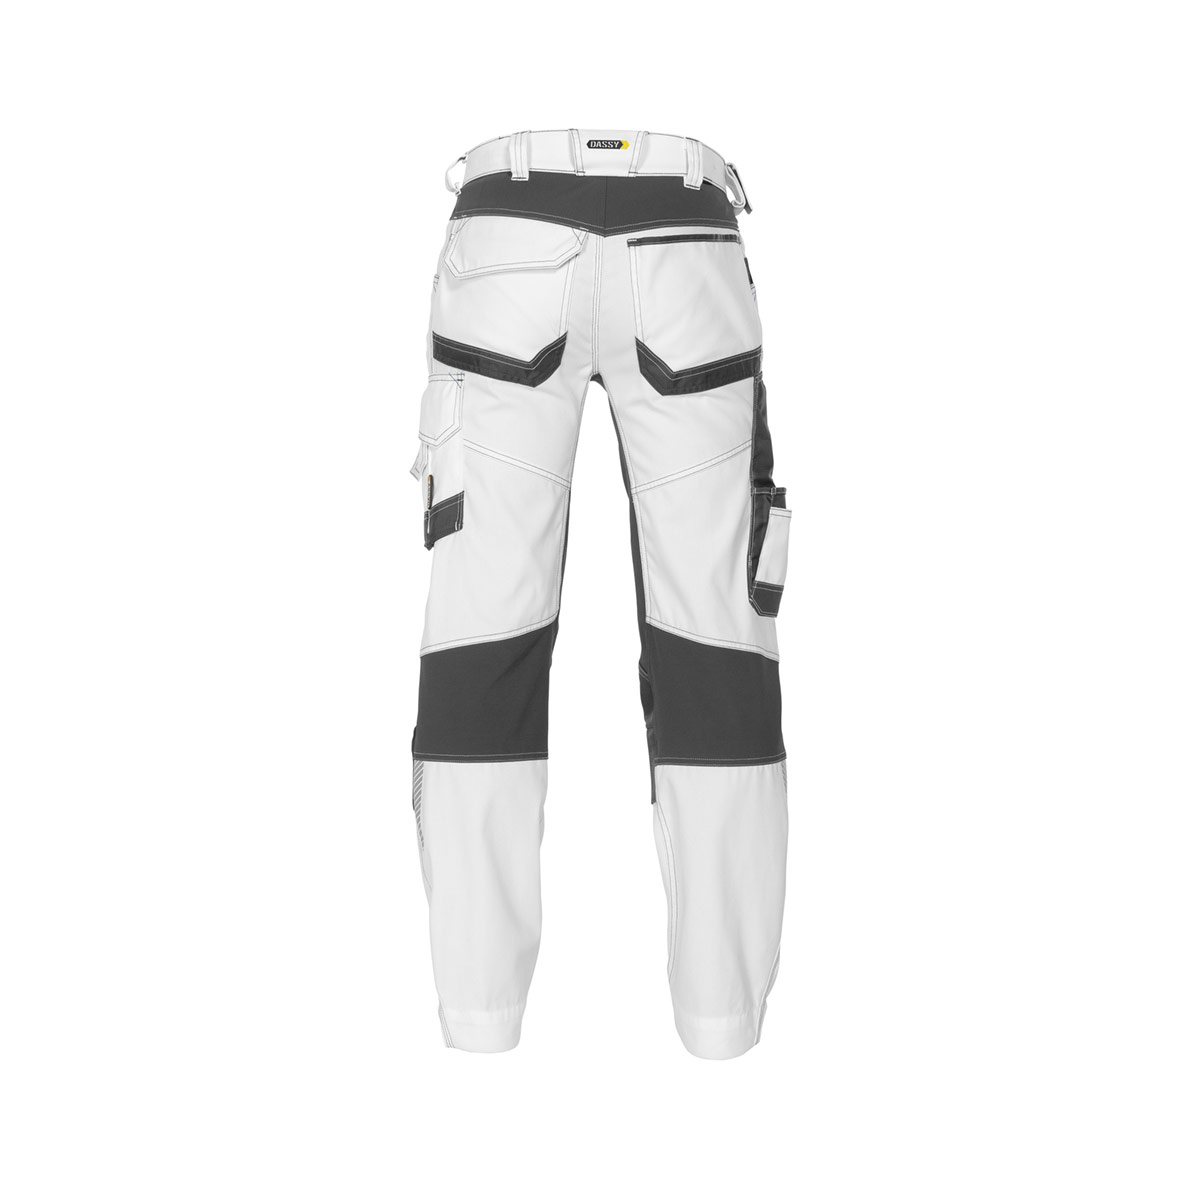 DASSY Dynax Painters Stretch trousers with knee pad pockets